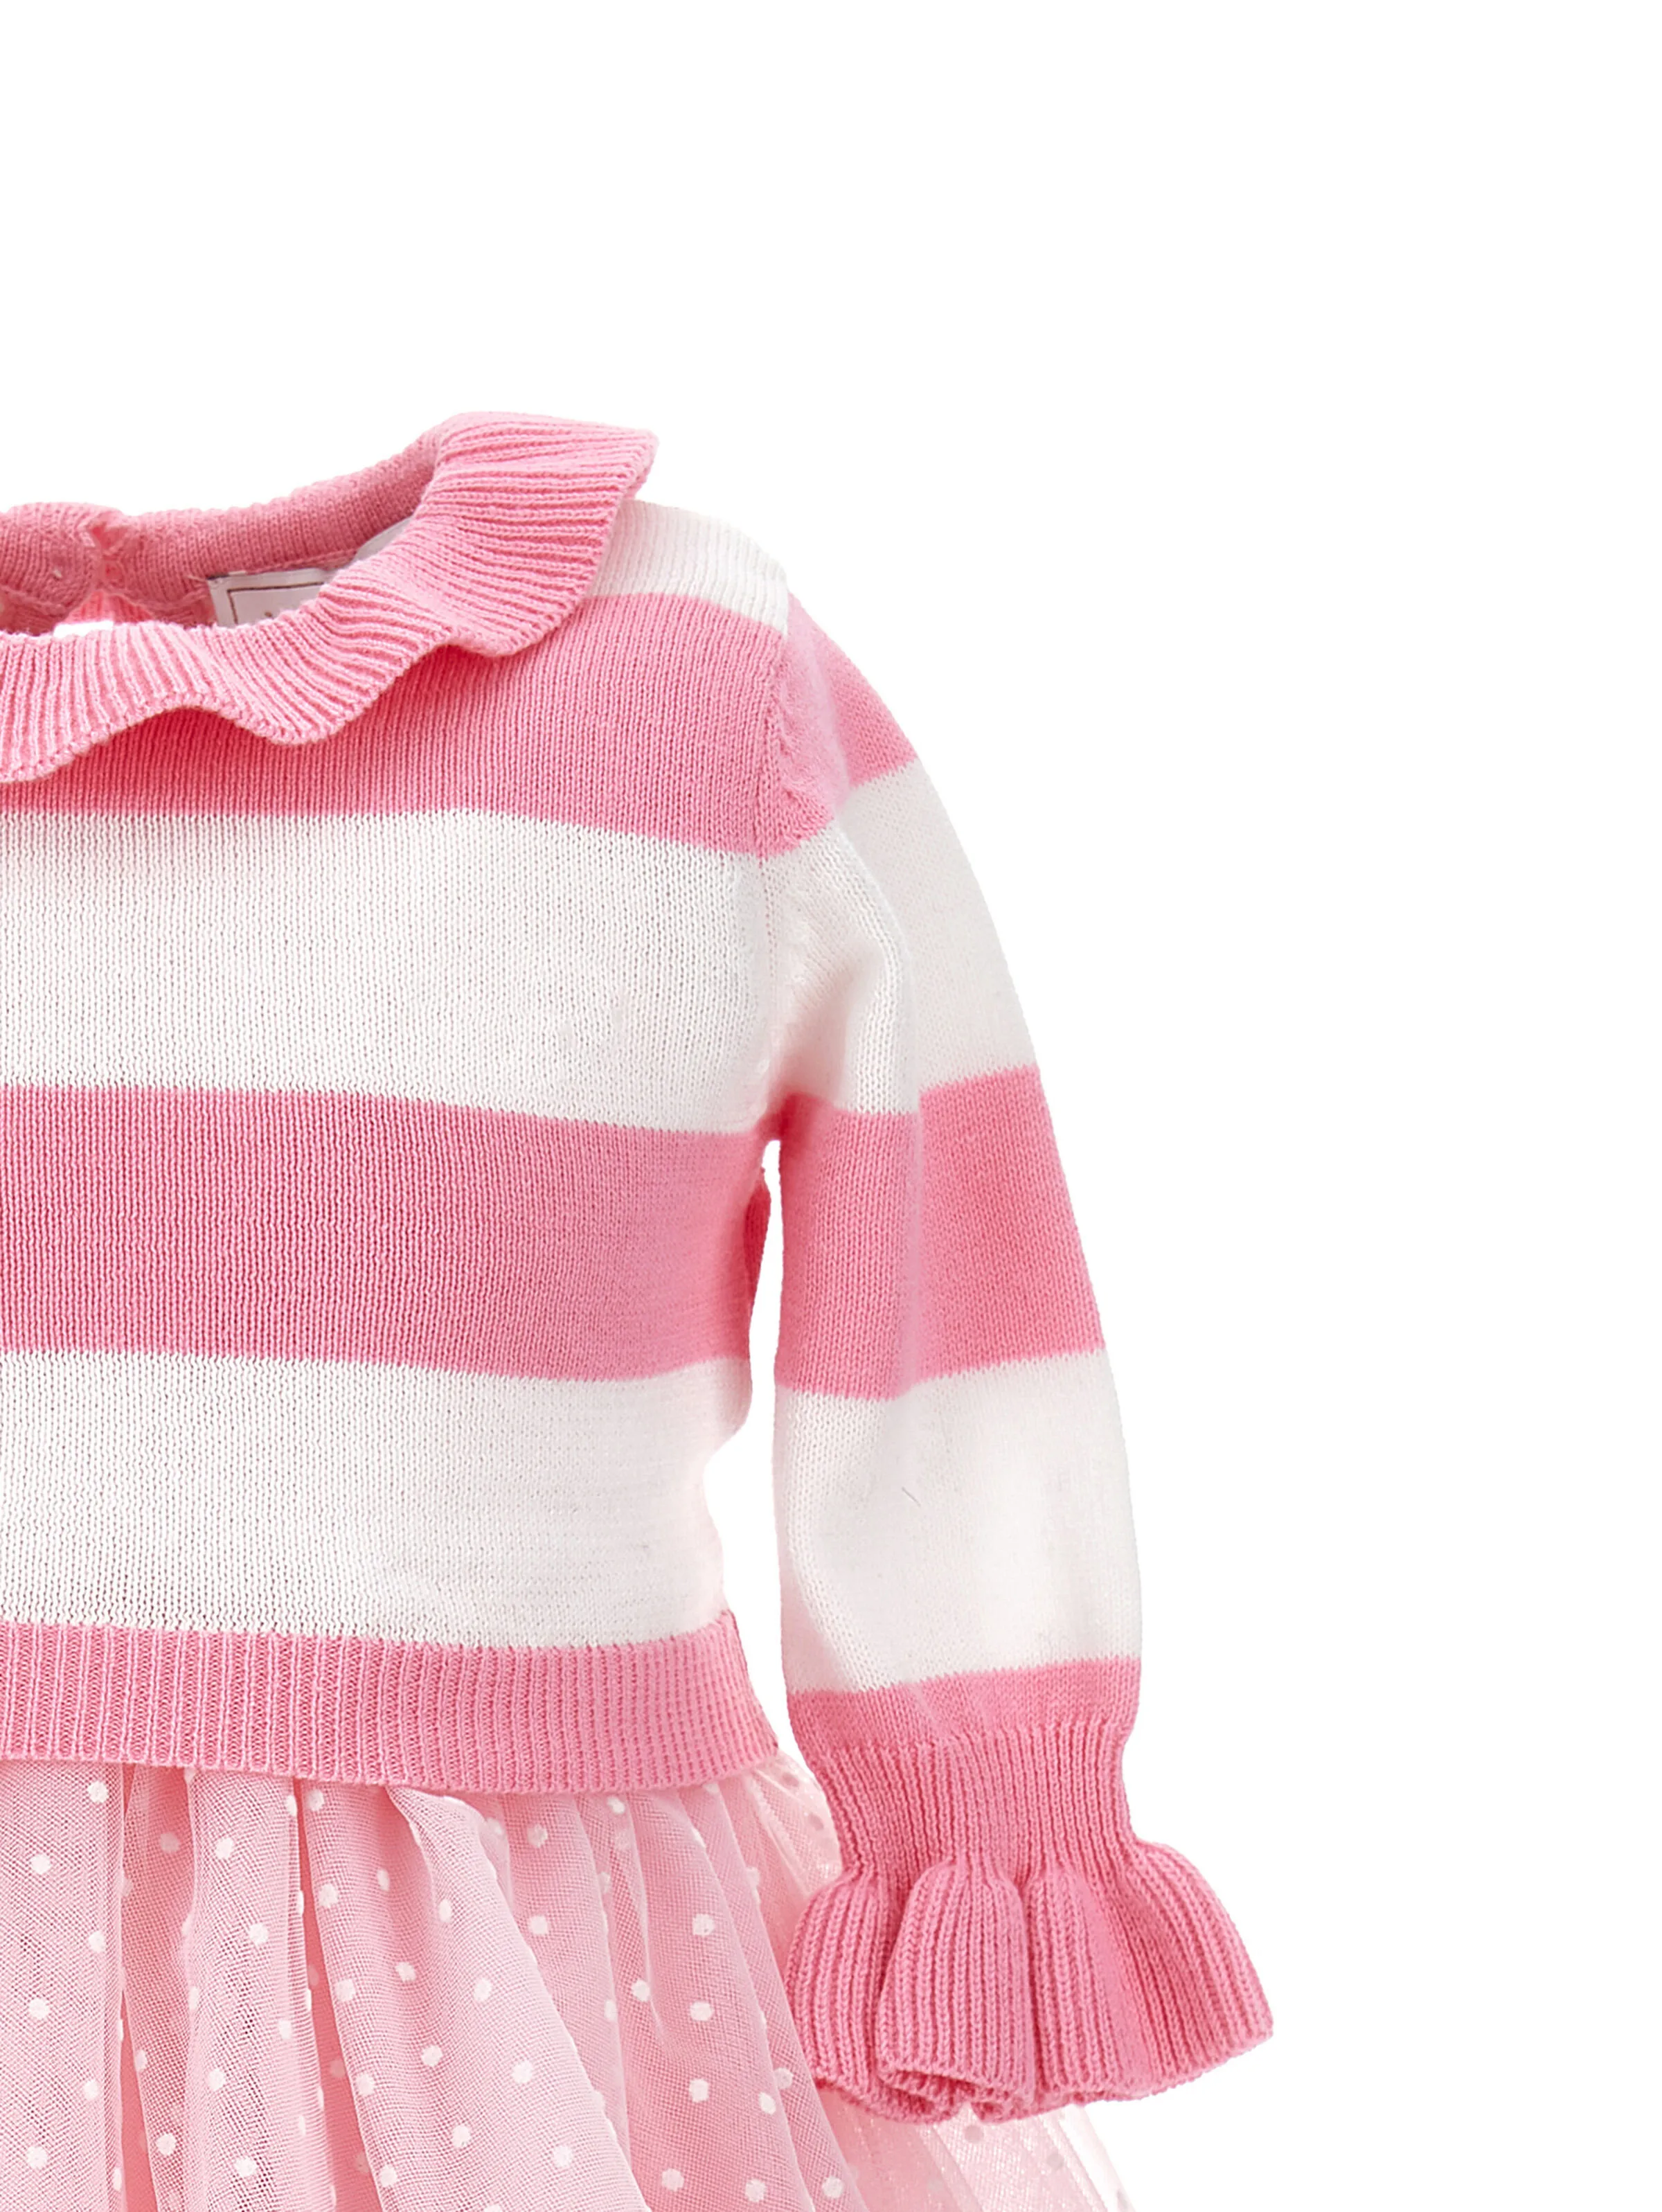 customized turn down collar ruffle stripe  pink and white  knitted sweater dress with tulle girl autumn baby  Fall winter girl d